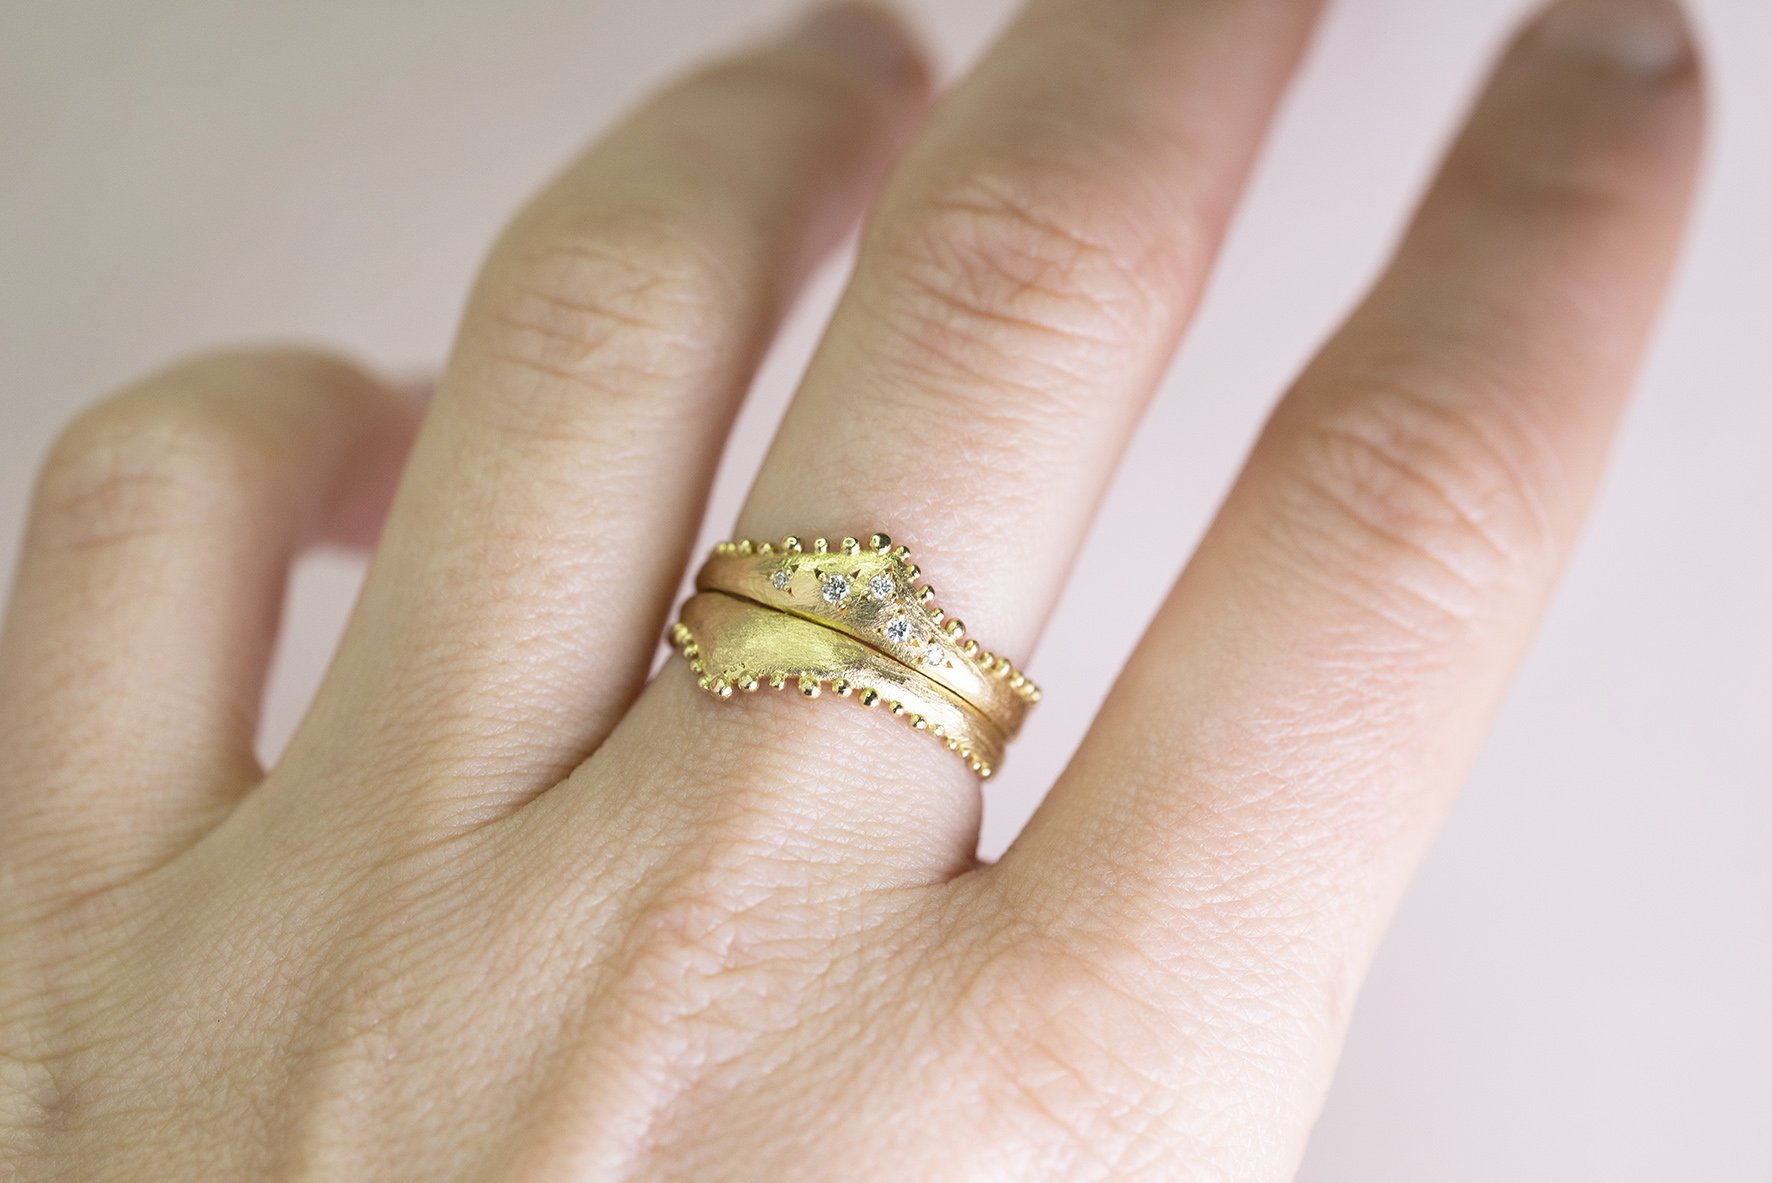  Two gold wishbone shaped rings displayed stacked so the points create a diamond on the finger.   The bottom ring is plain and worn as a wedding band, whilst the top one as the engagement ring has diamonds inset. 